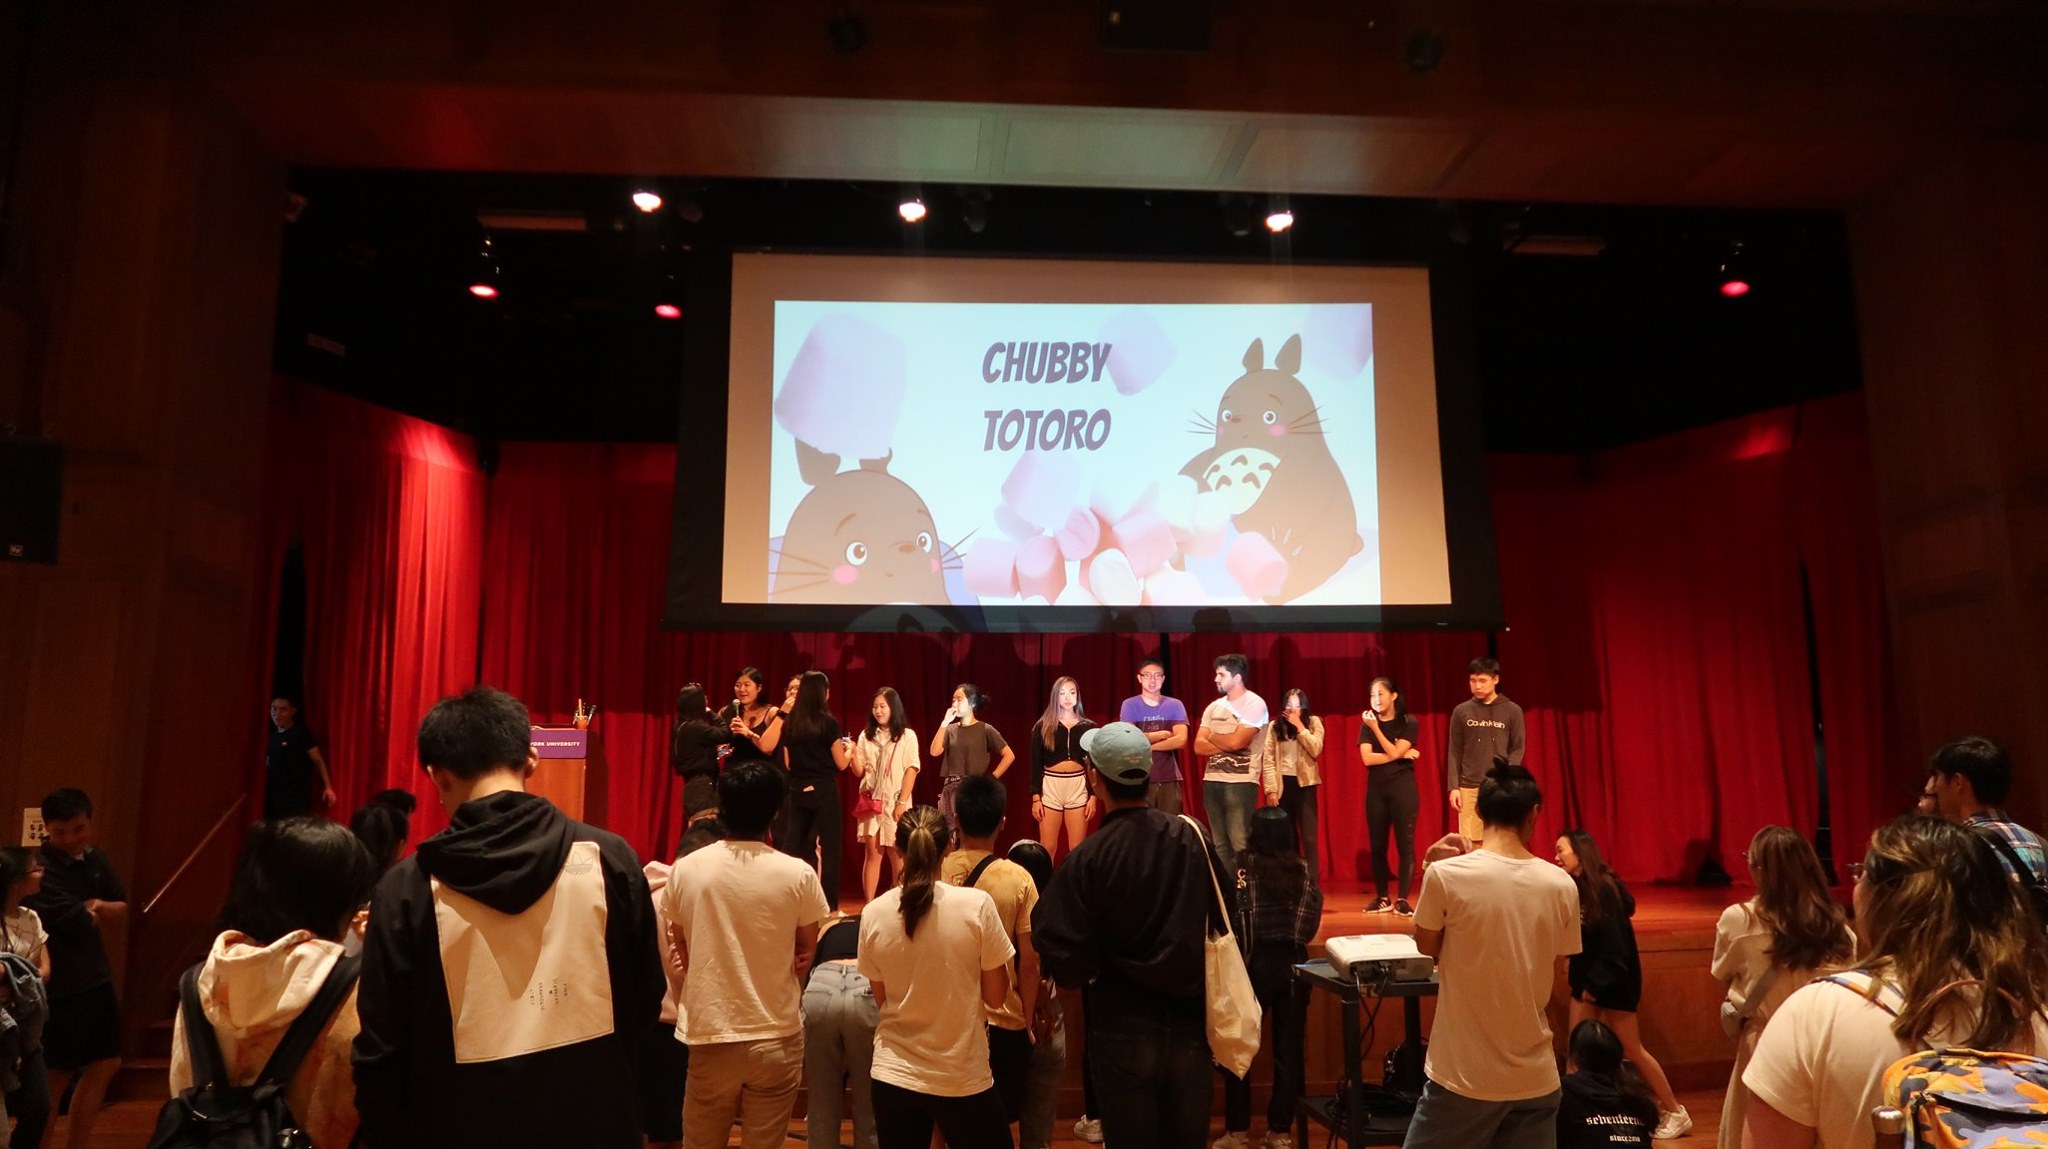 An image titled Chubby Totoro is projected behind students standing onstage during a game.